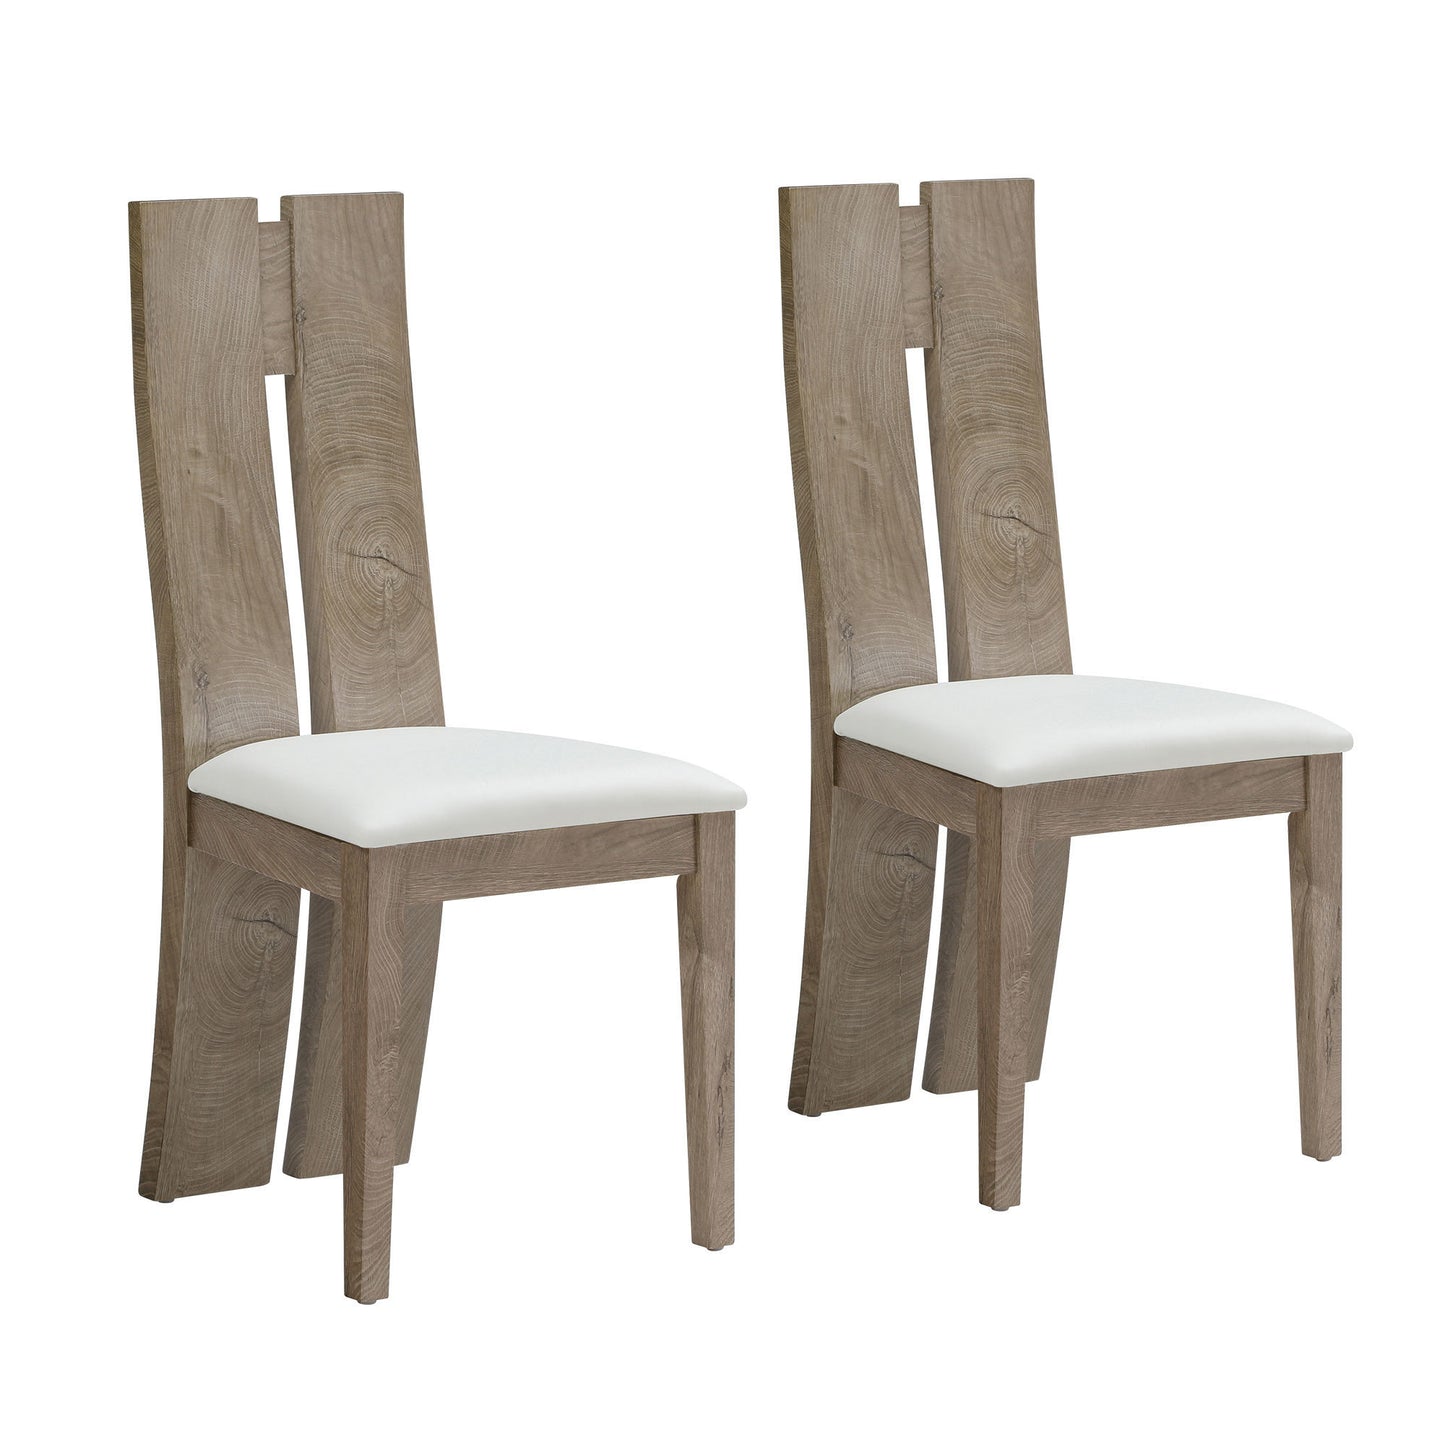 Dining Chair Set of 2 PU Leather Upholstered Cushion Seat Wooden High Back